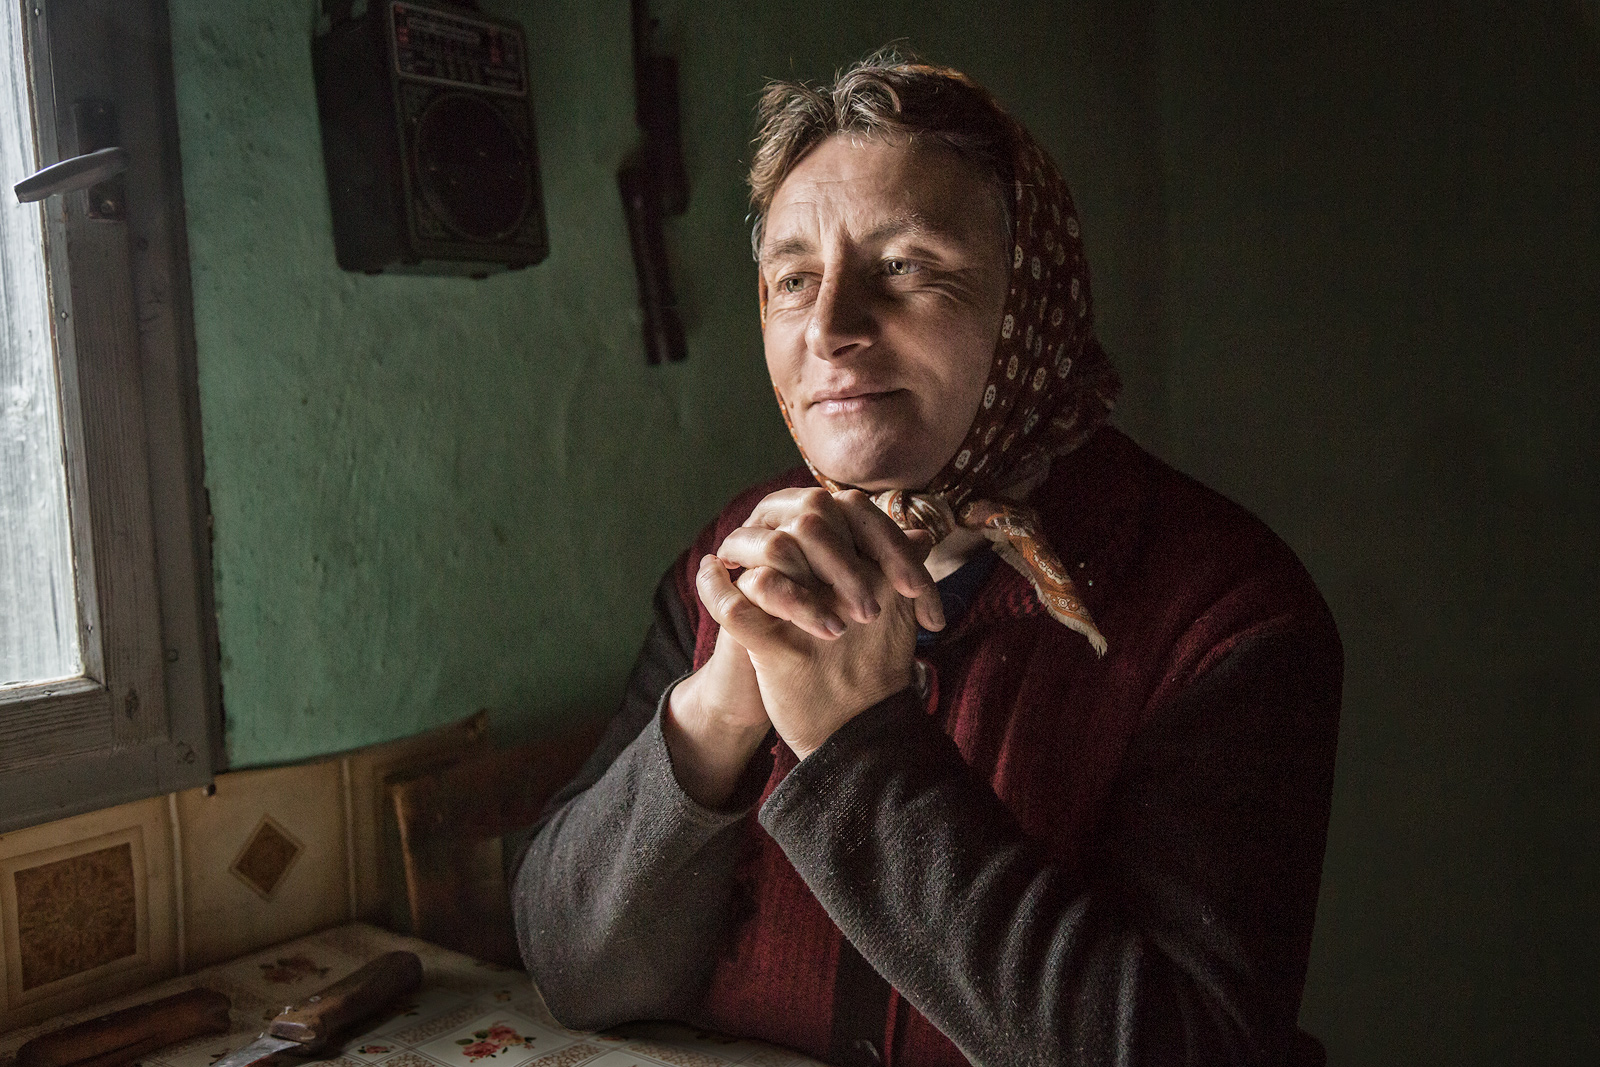 A rural Romanian woman sitting at her table is side-lit by window lighting.